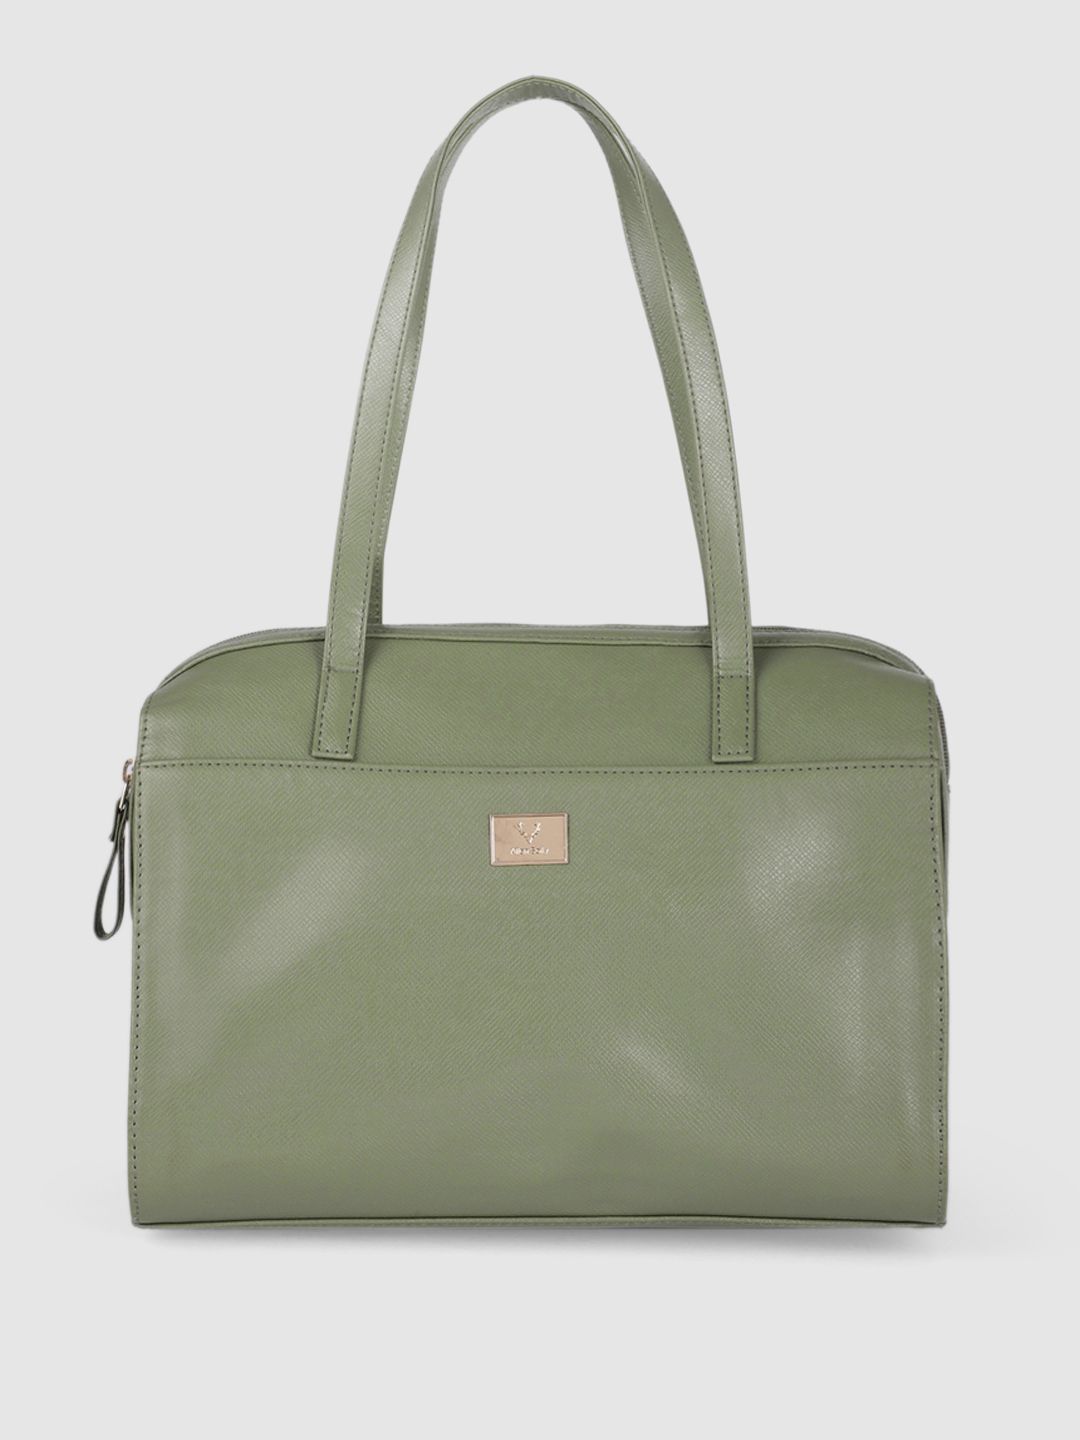 Allen Solly Green PU Structured Shoulder Bag Price in India